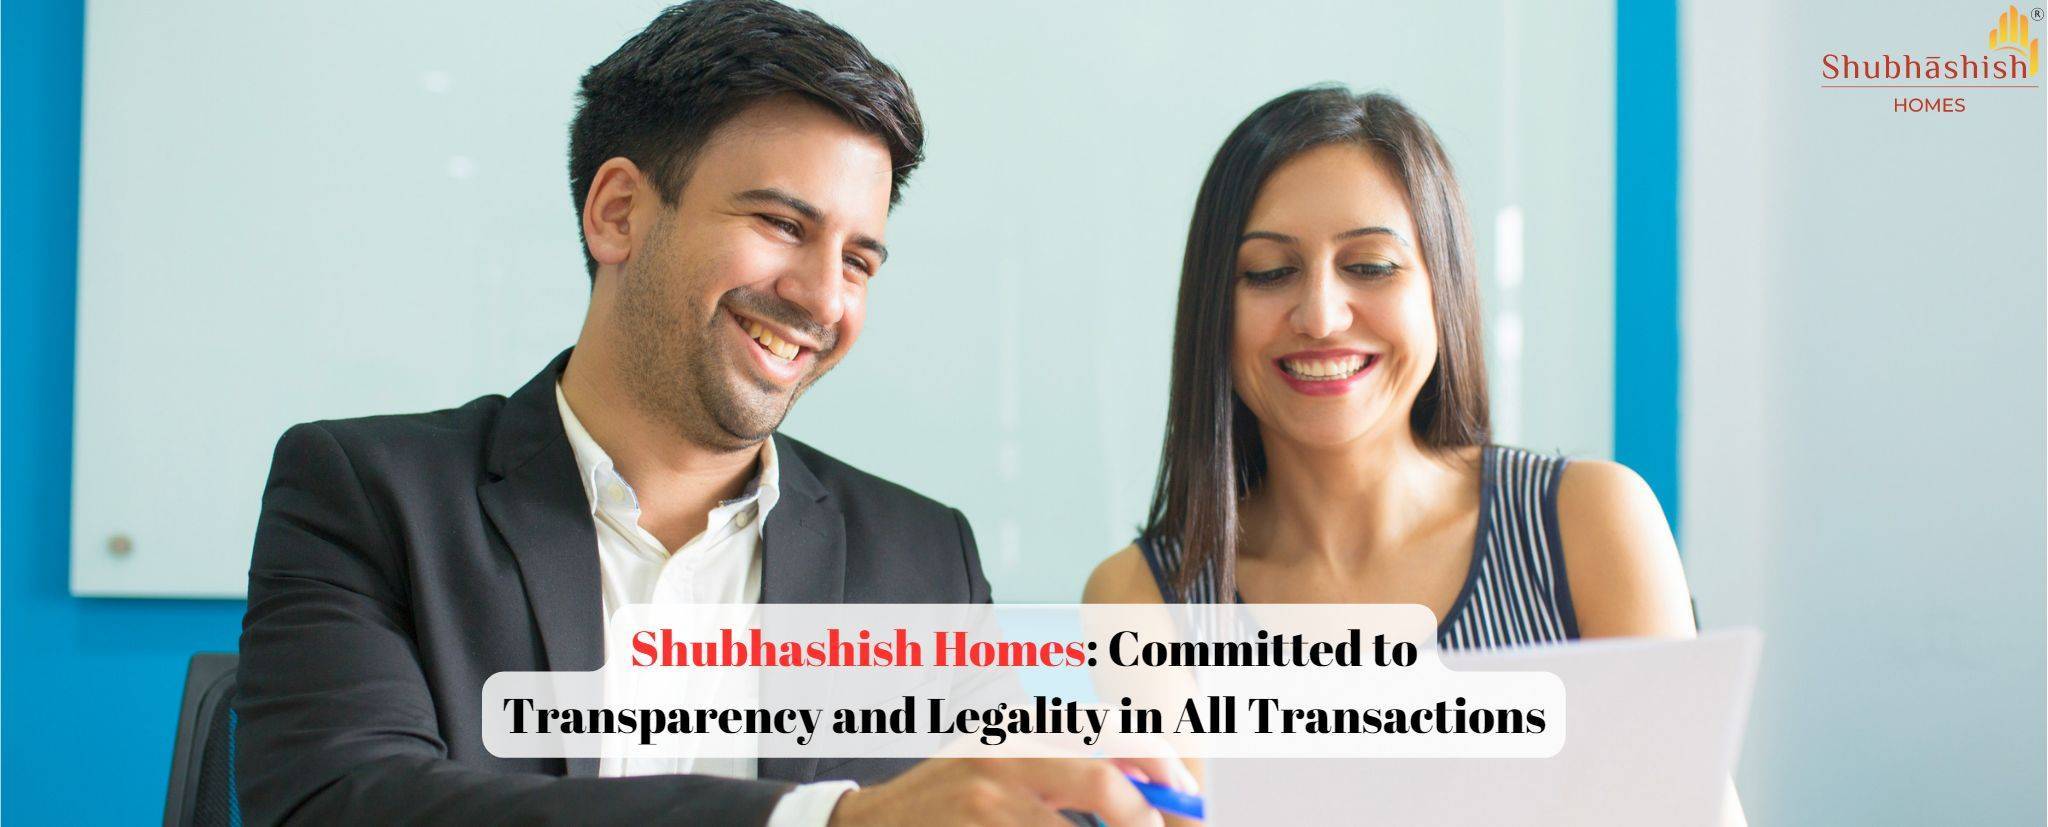 Shubhashish Homes: Committed to Transparency and Legality in All Transactions